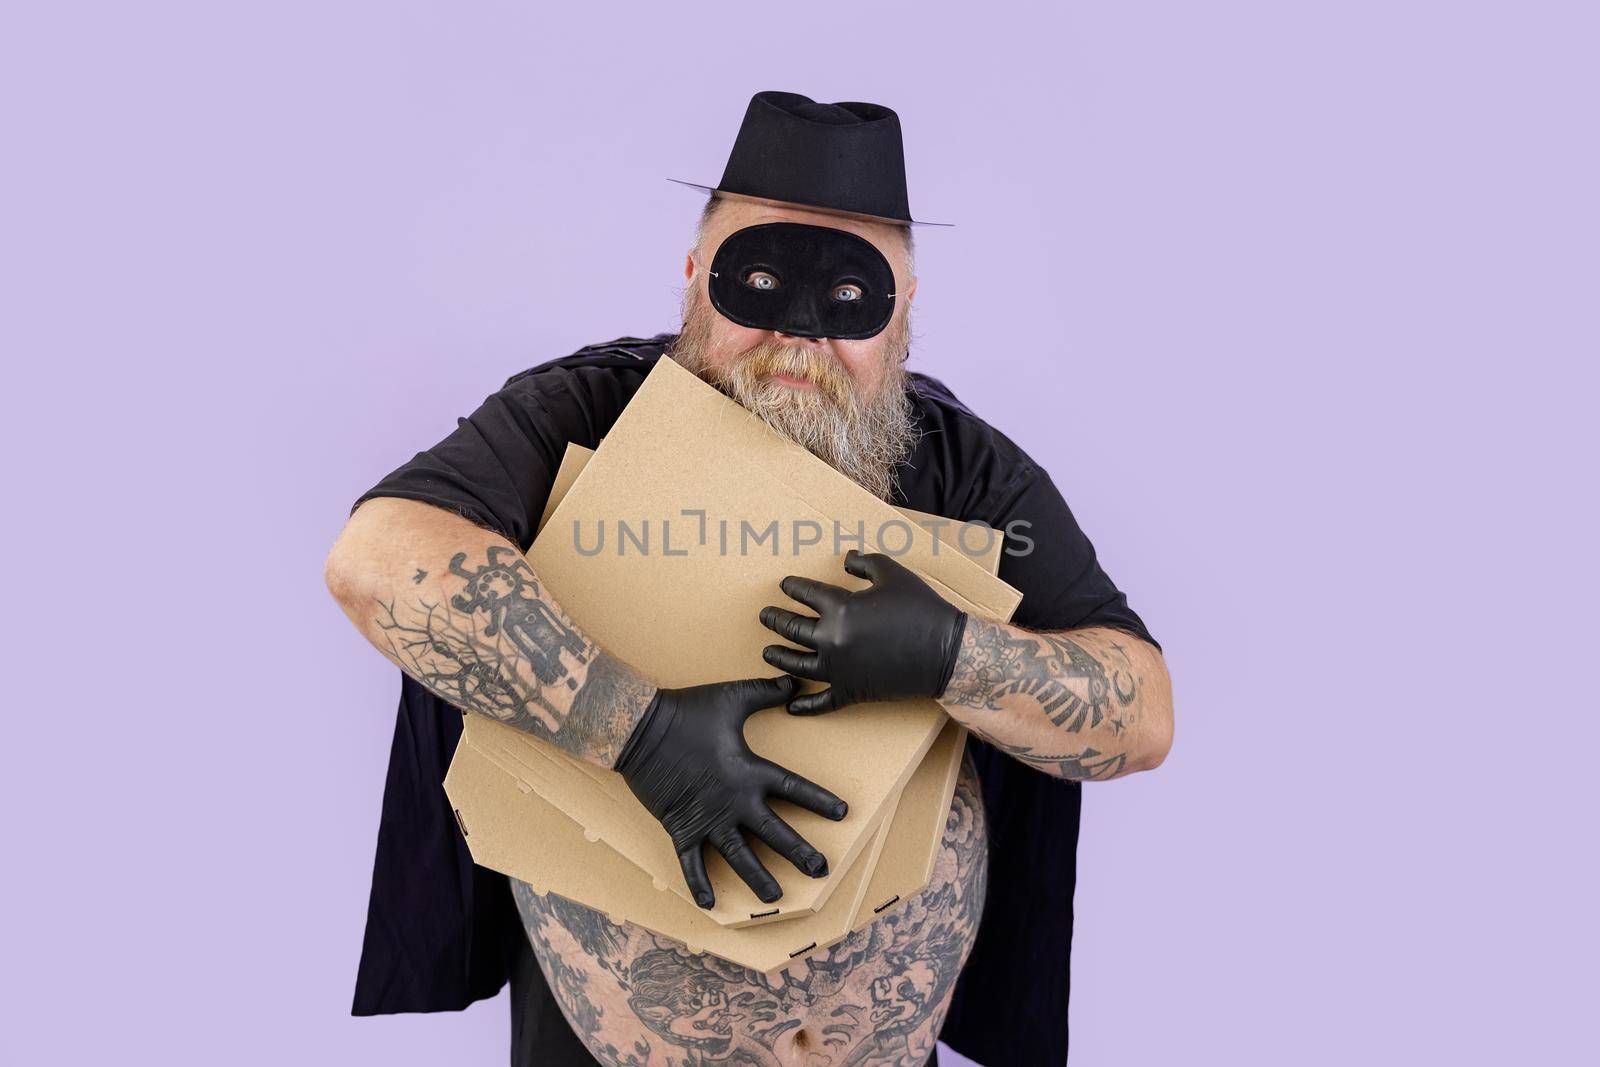 Man in Zorro costume with overweight hugs brown boxes of pizza on purple background by Yaroslav_astakhov